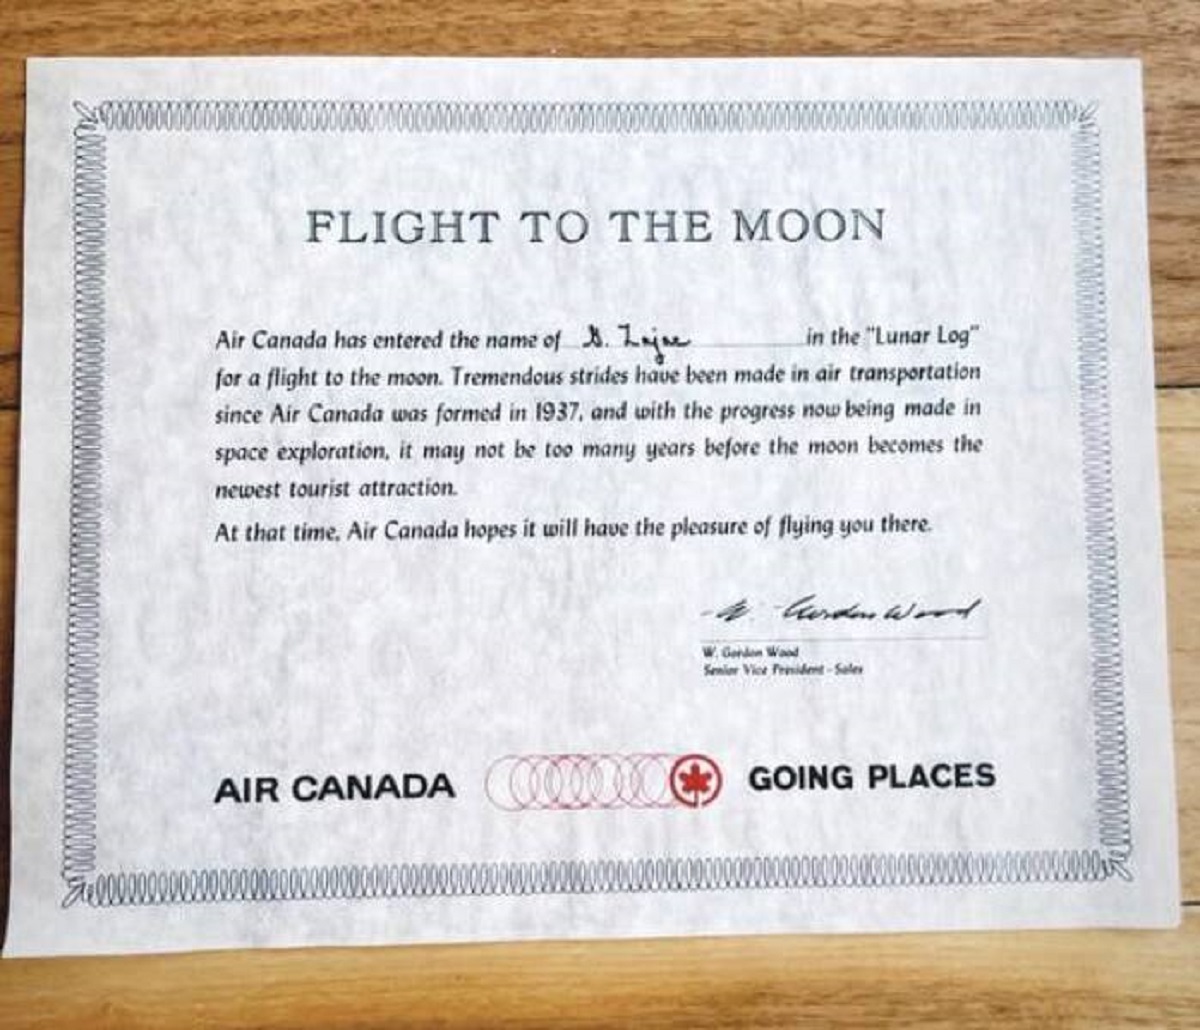 Here is a reservation to a flight to the moon that Air Canada offered in 1969 (Pan Am did something similar, and believed they would be able to offer flights by the year 2000).